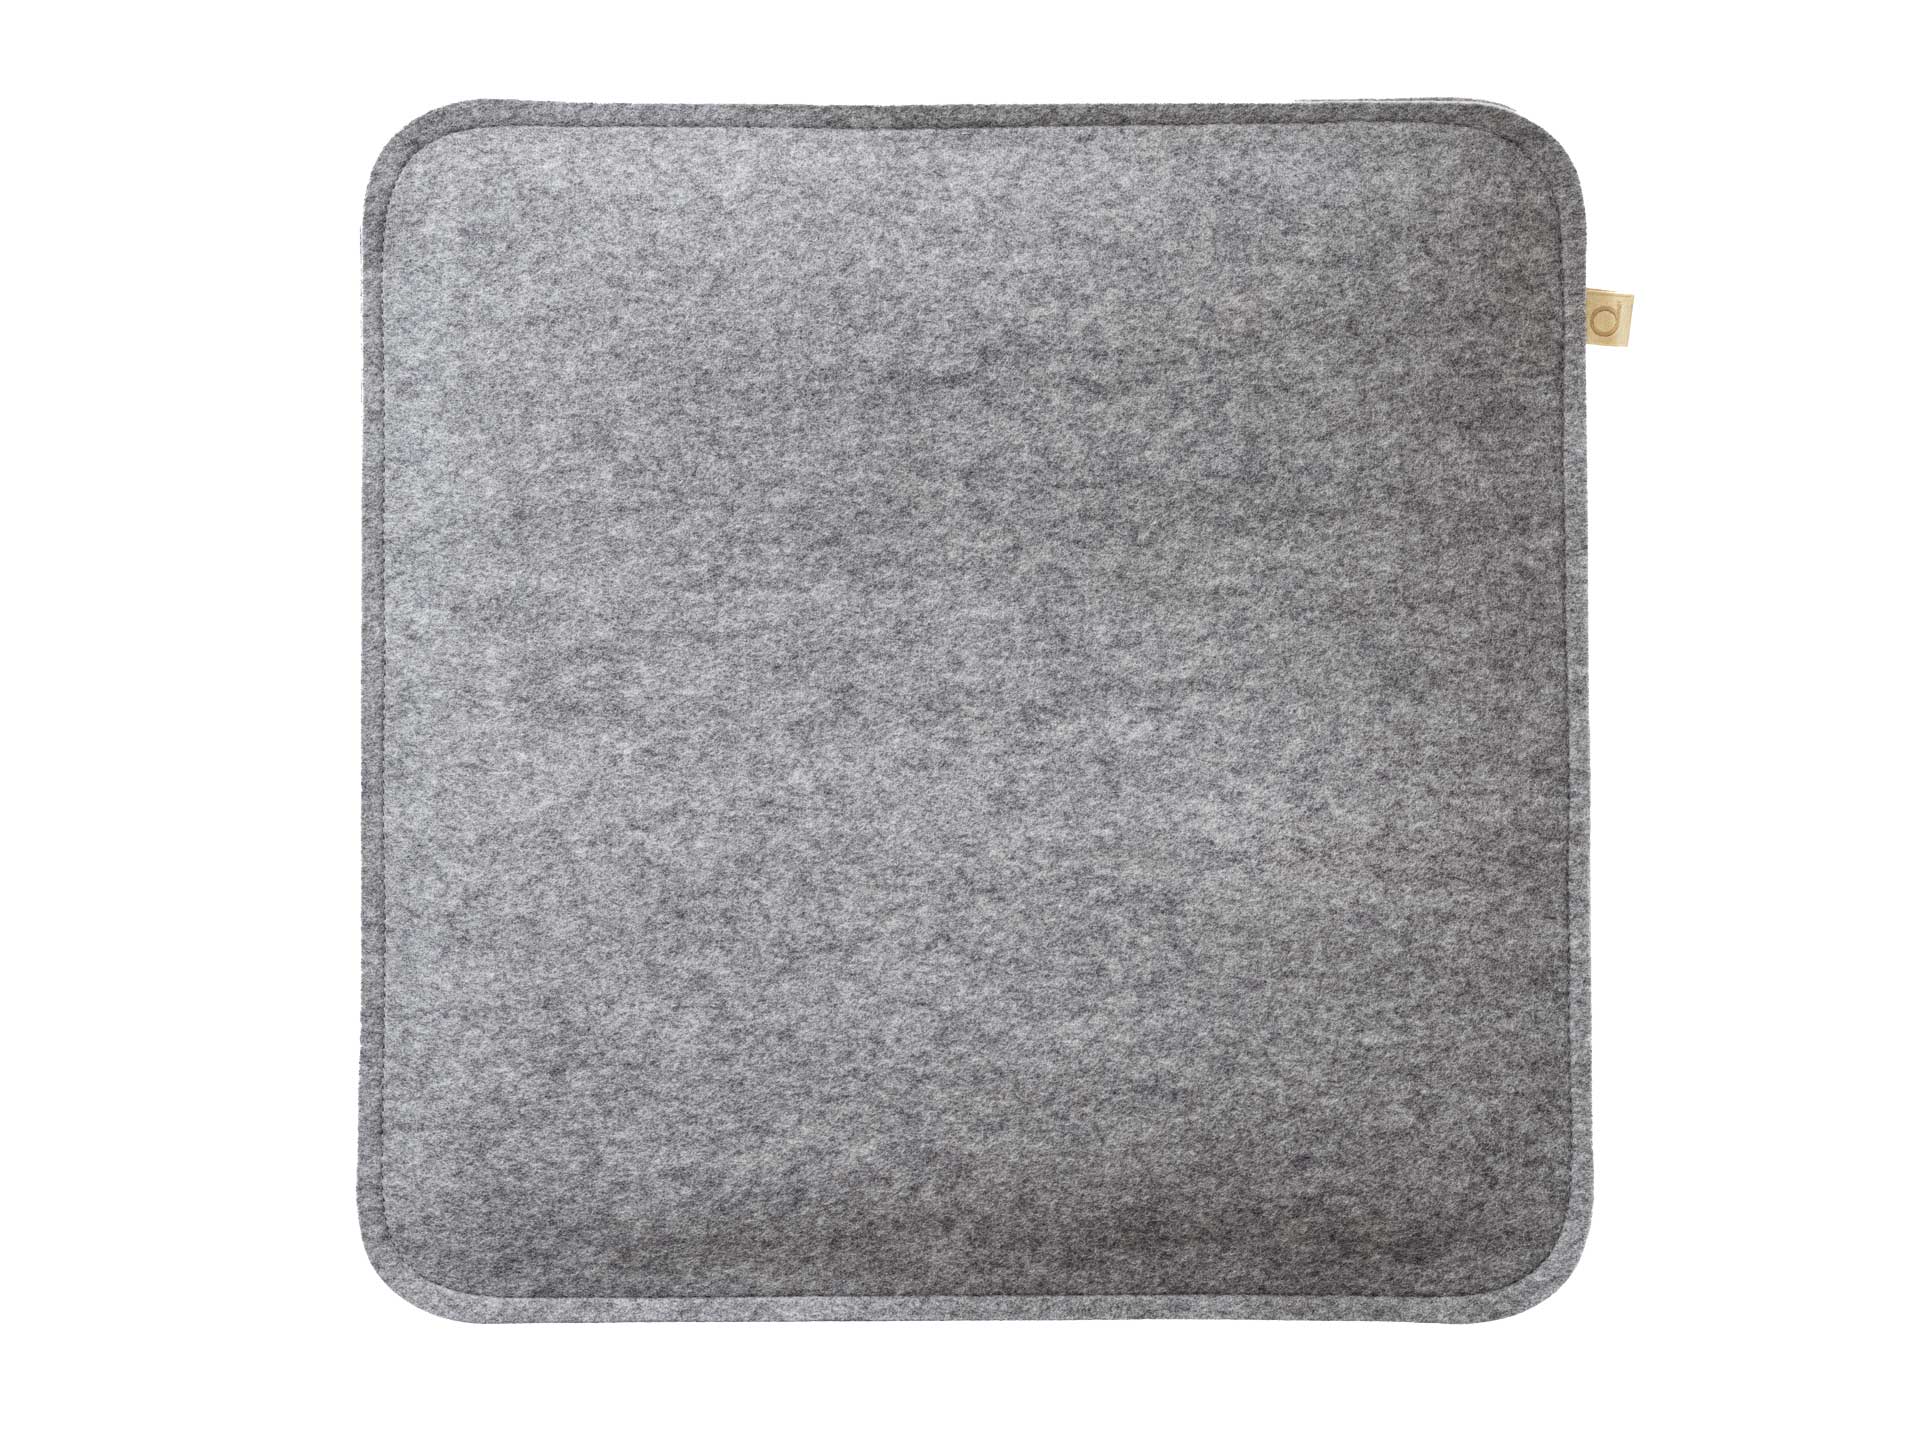 Upholstered Seat Pad